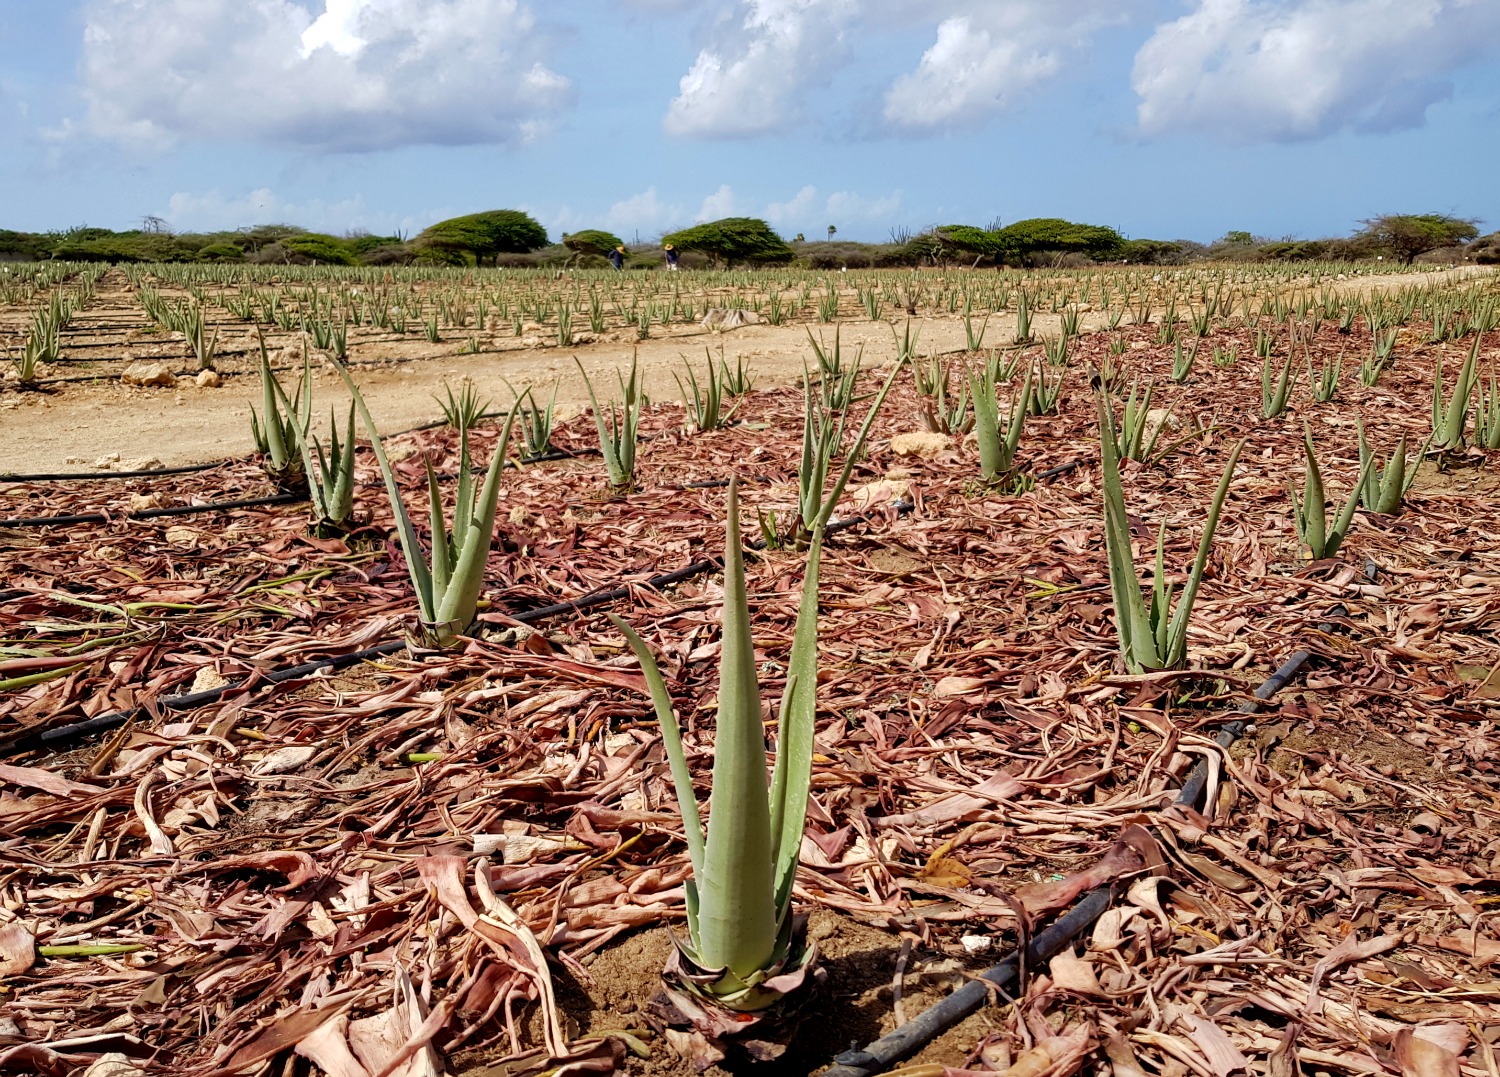 A field of aloe plants at the Aruba aloe factory where you can learn more about its importance to the island and see products being made